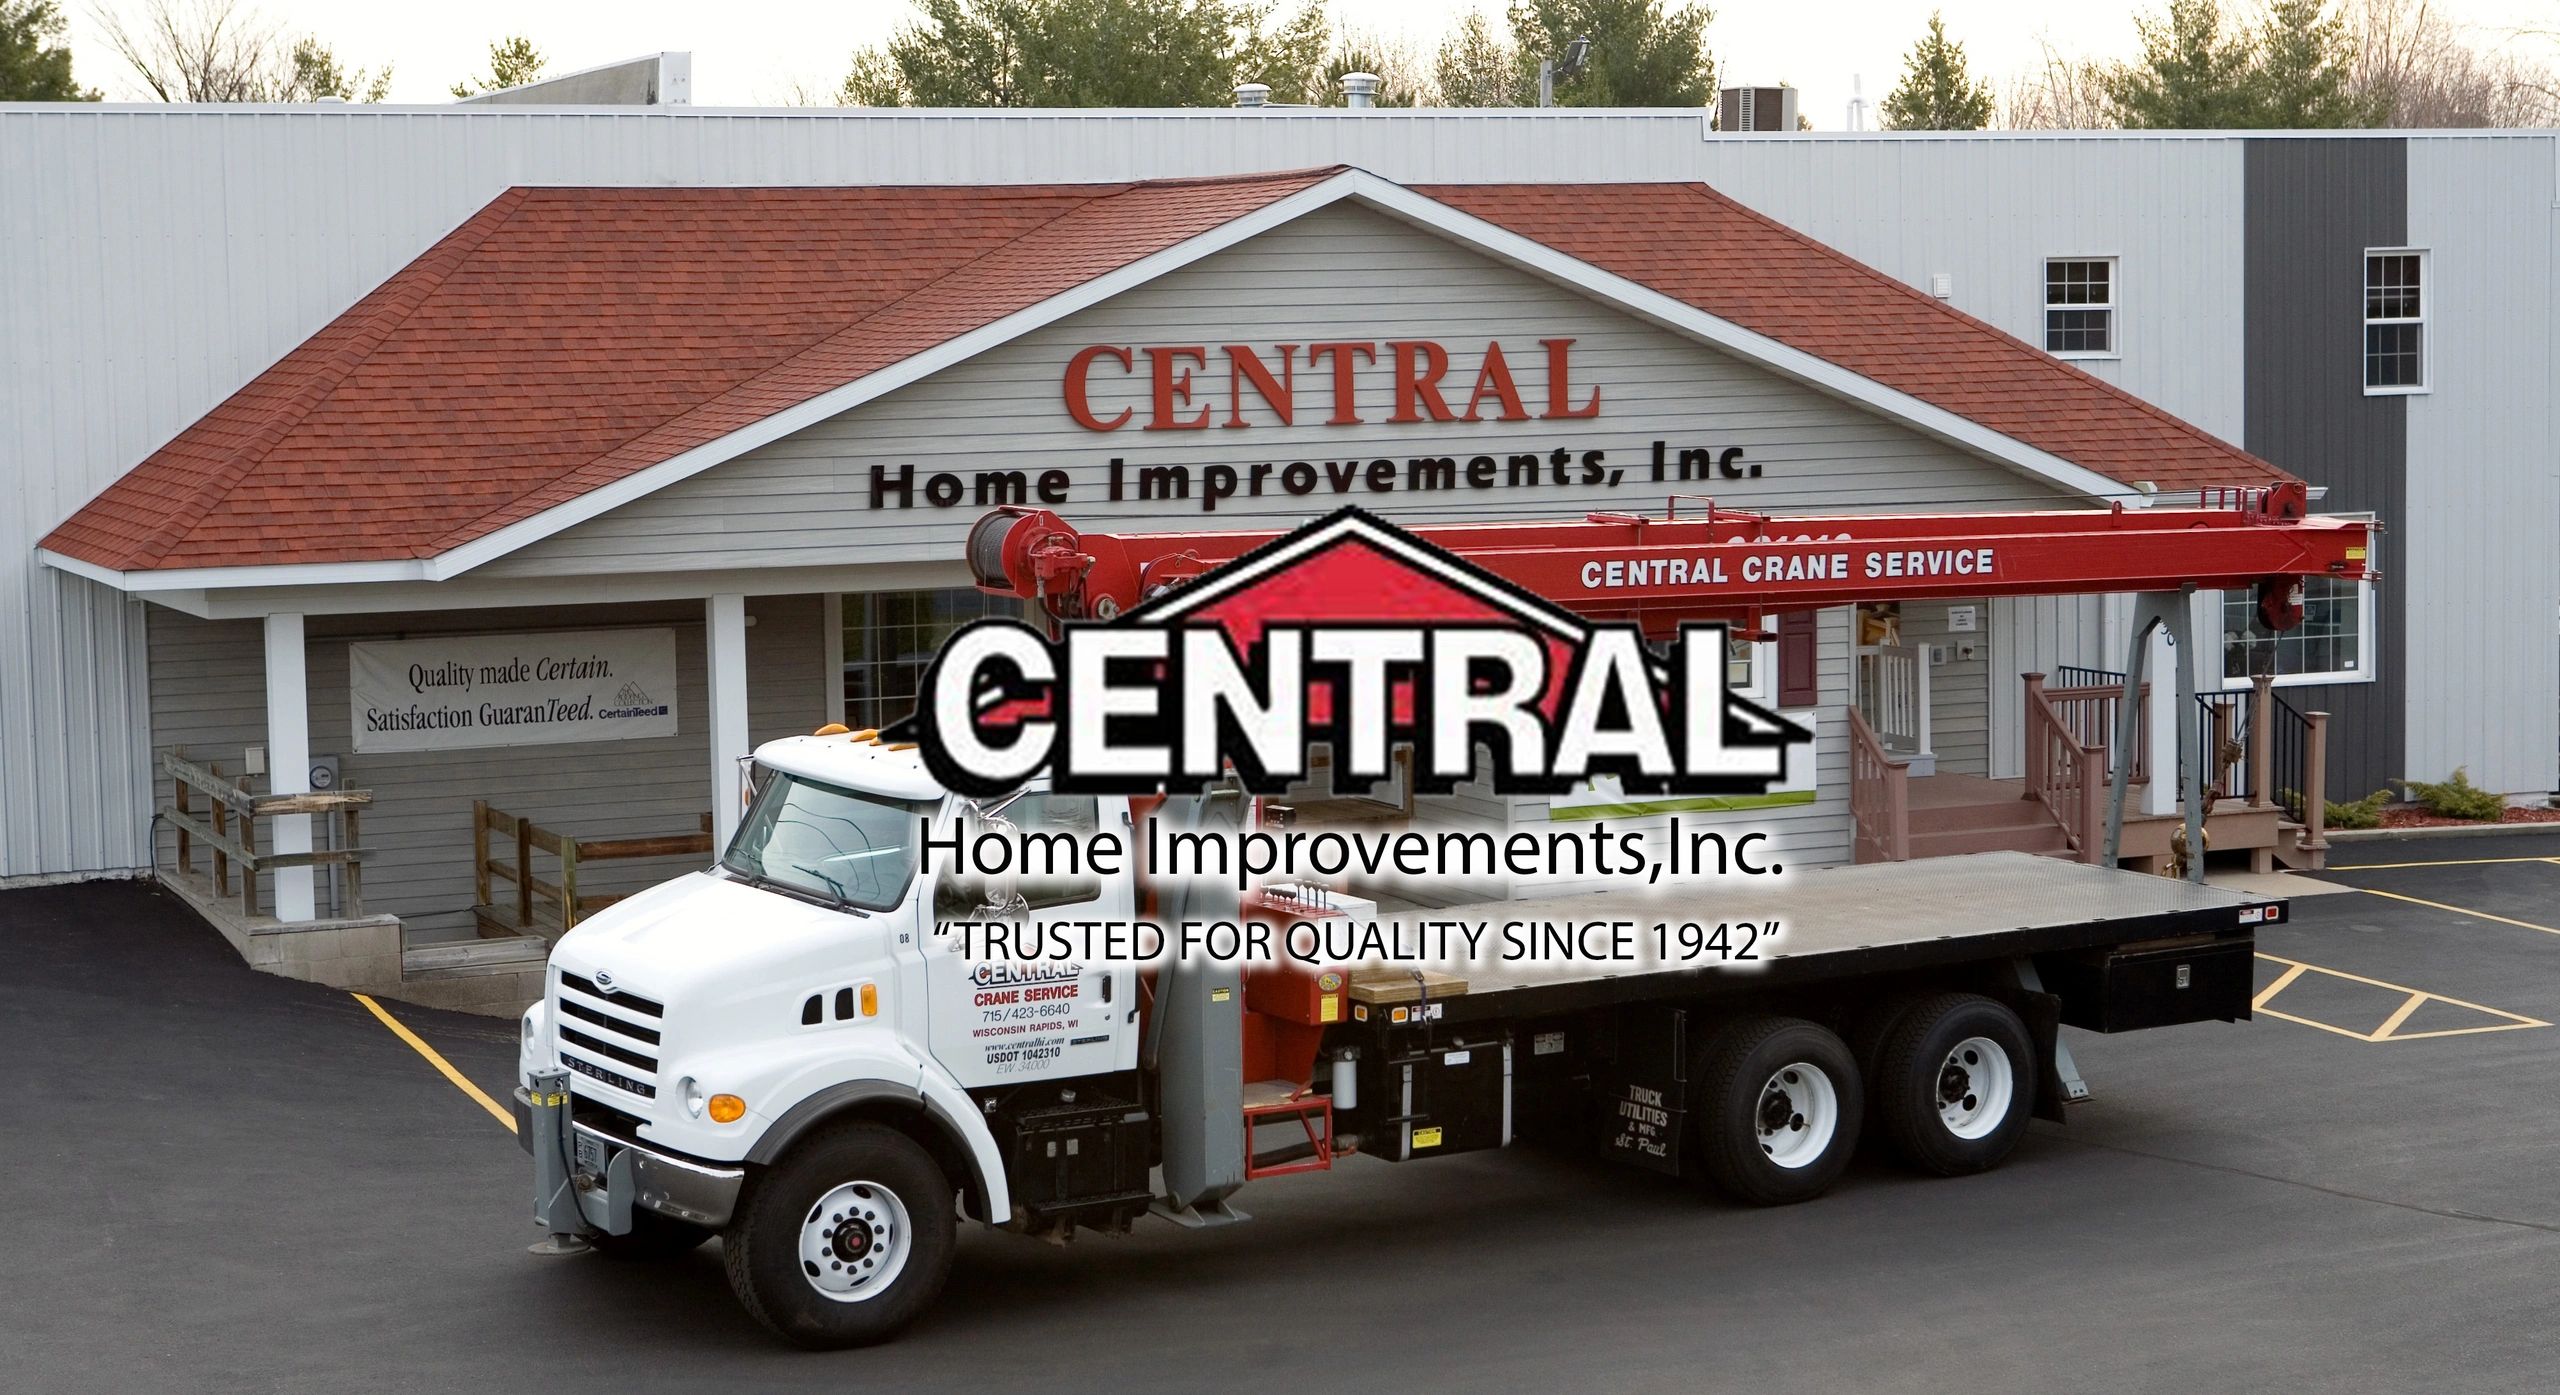 Central Home Improvements Inc